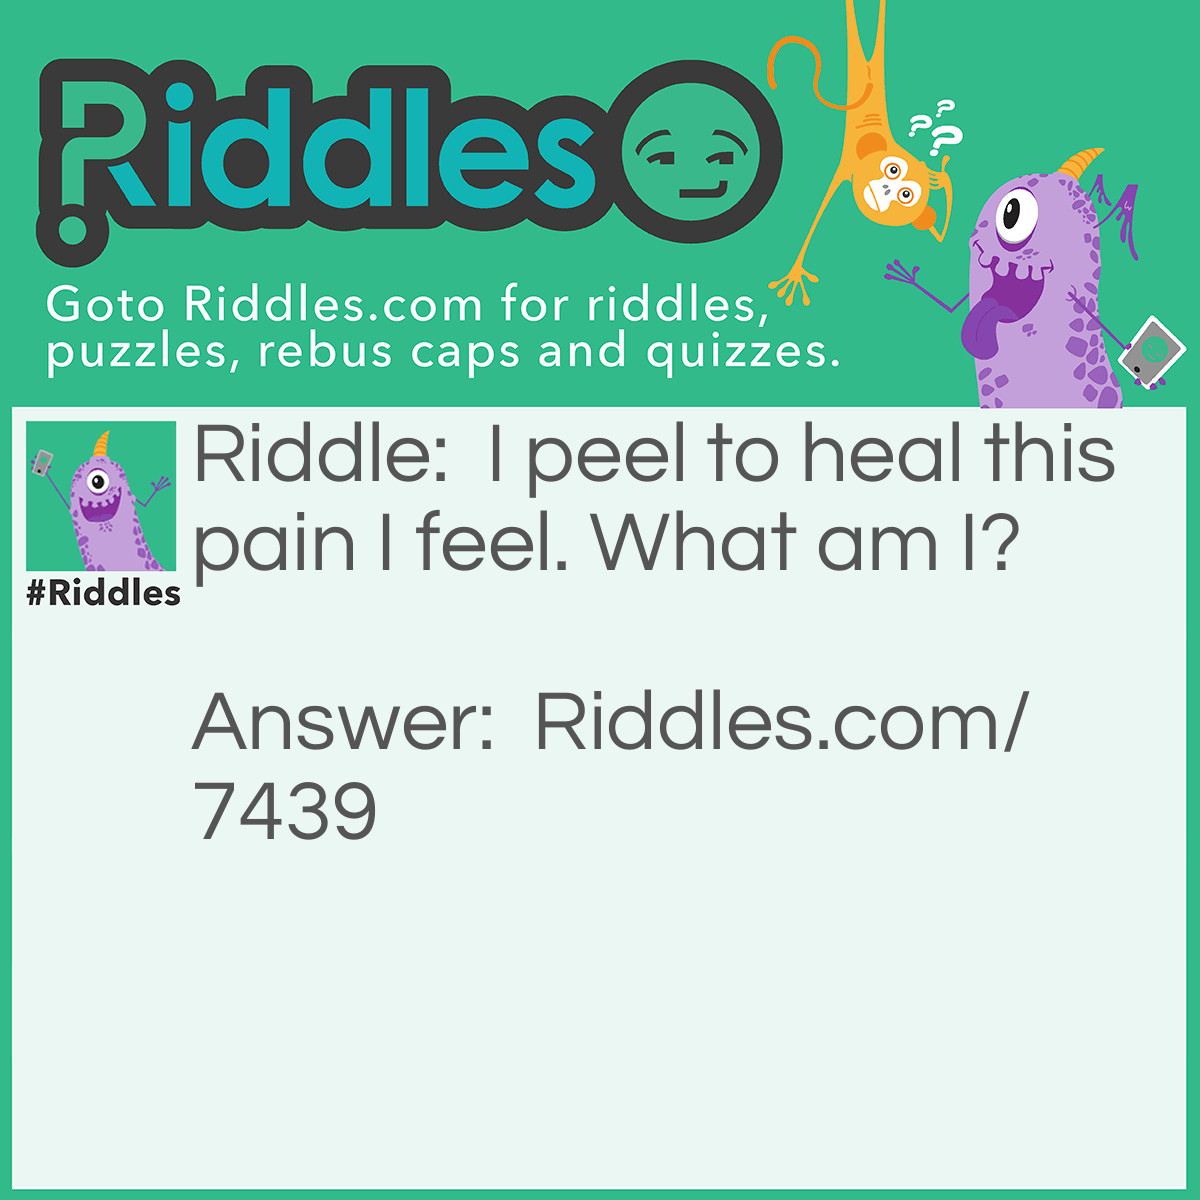 Riddle: I peel to heal this pain I feel. What am I? Answer: "Sunburn" - Reasoning: Sunburn peels when healing, to get rid of damaged skin tissue. Thus, it peels to heal the pain of the sunburn.